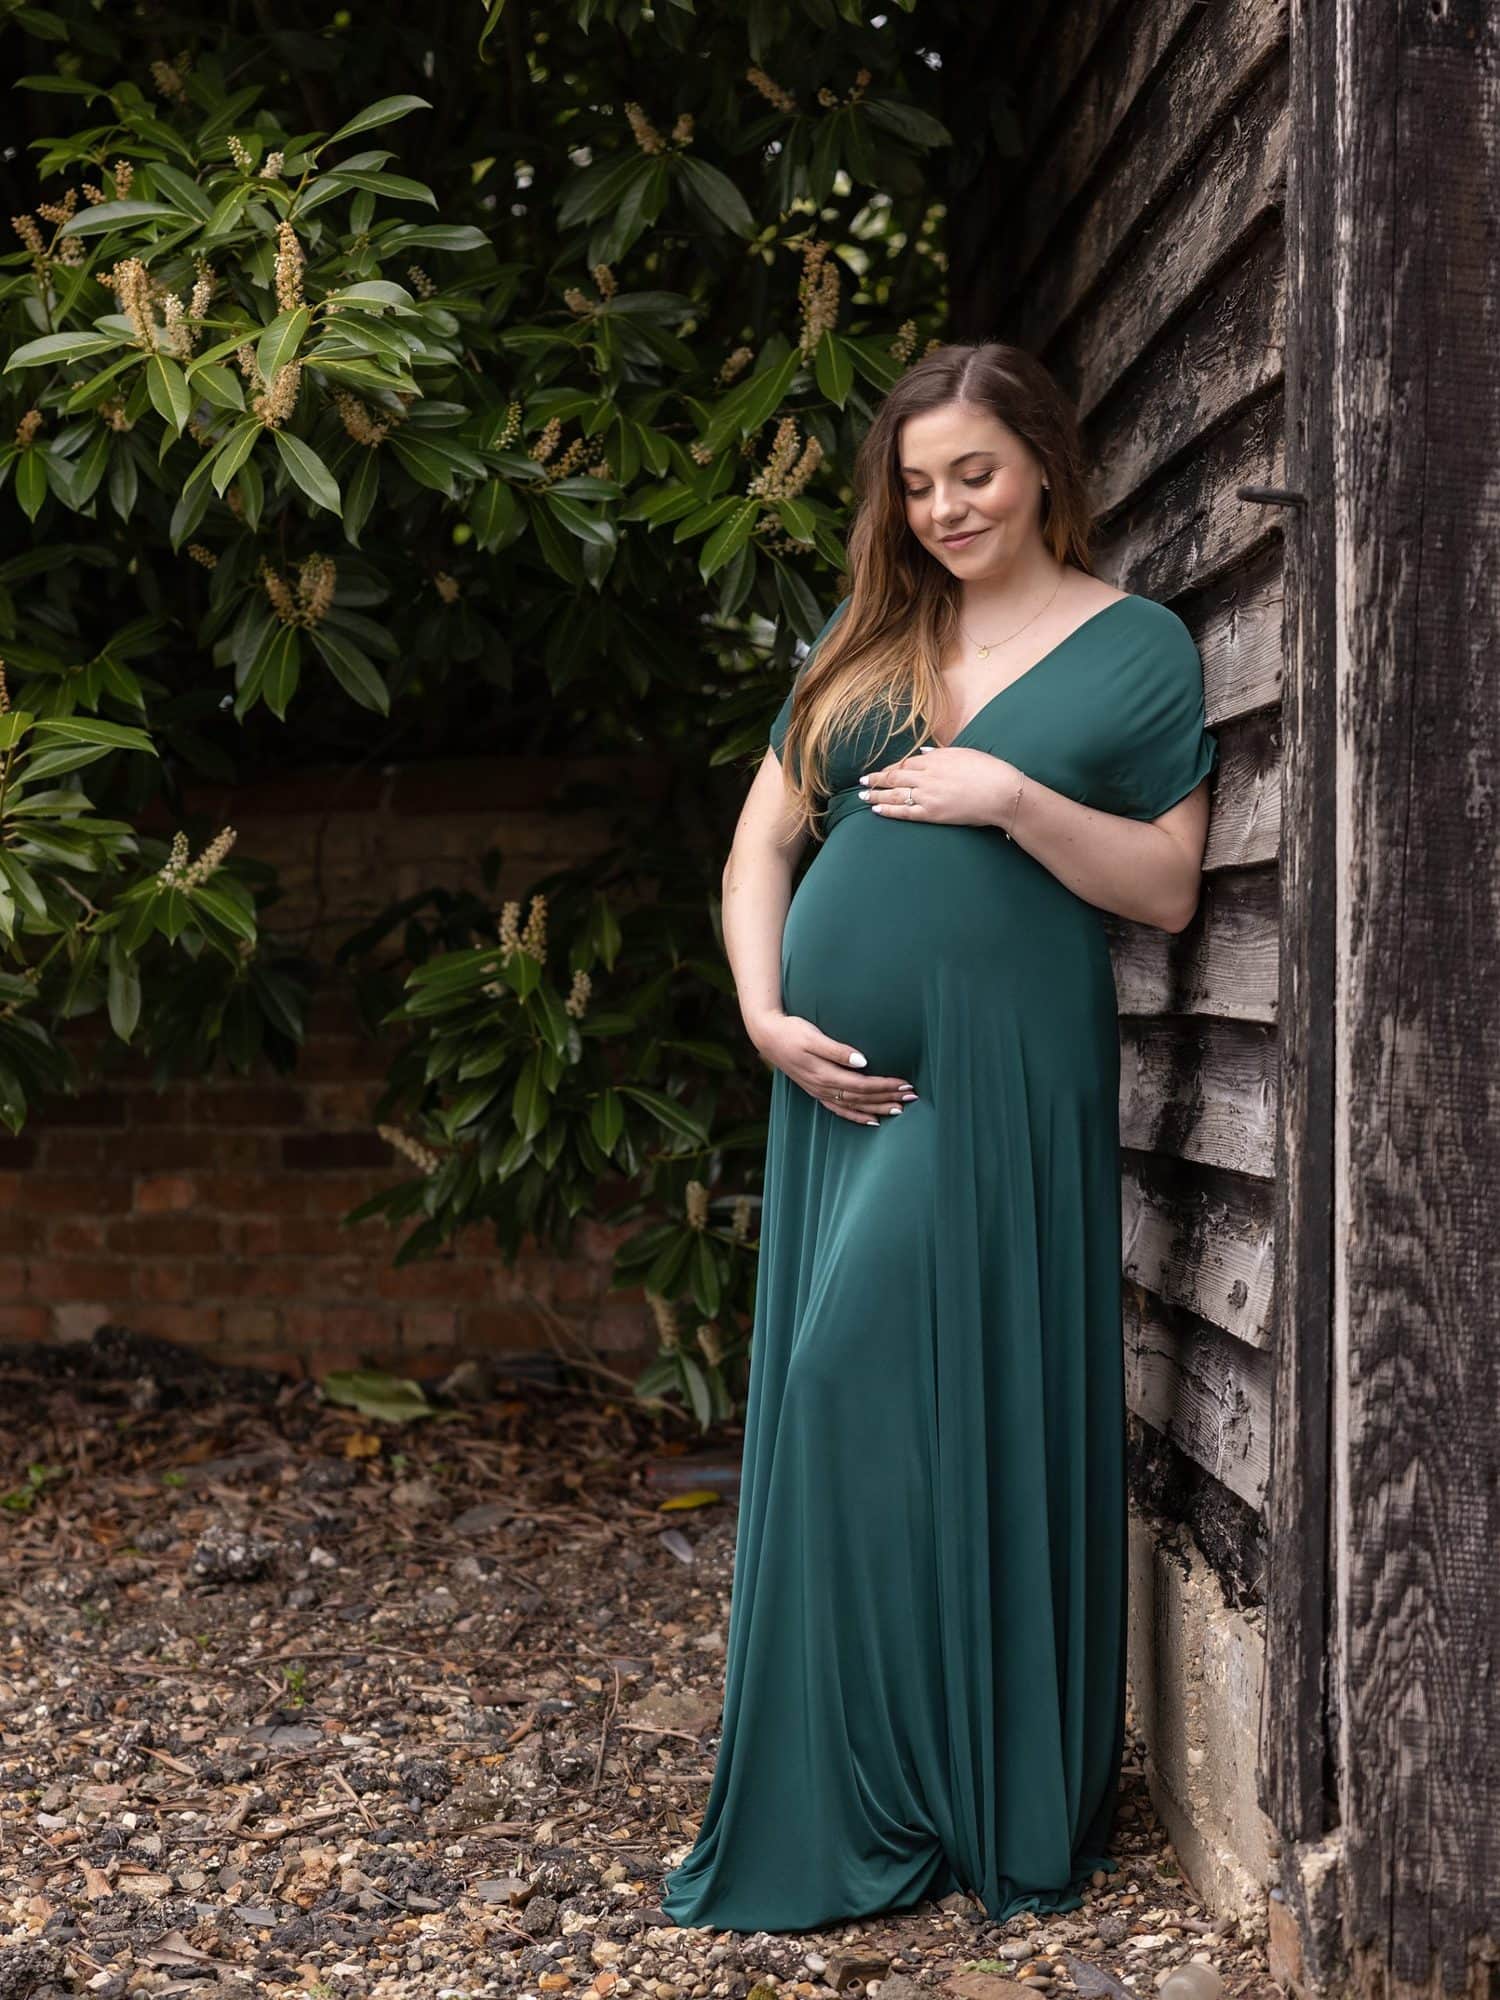 Pregnant lady in green dress leans against old barn during Maternity shoot on Suffolk farm